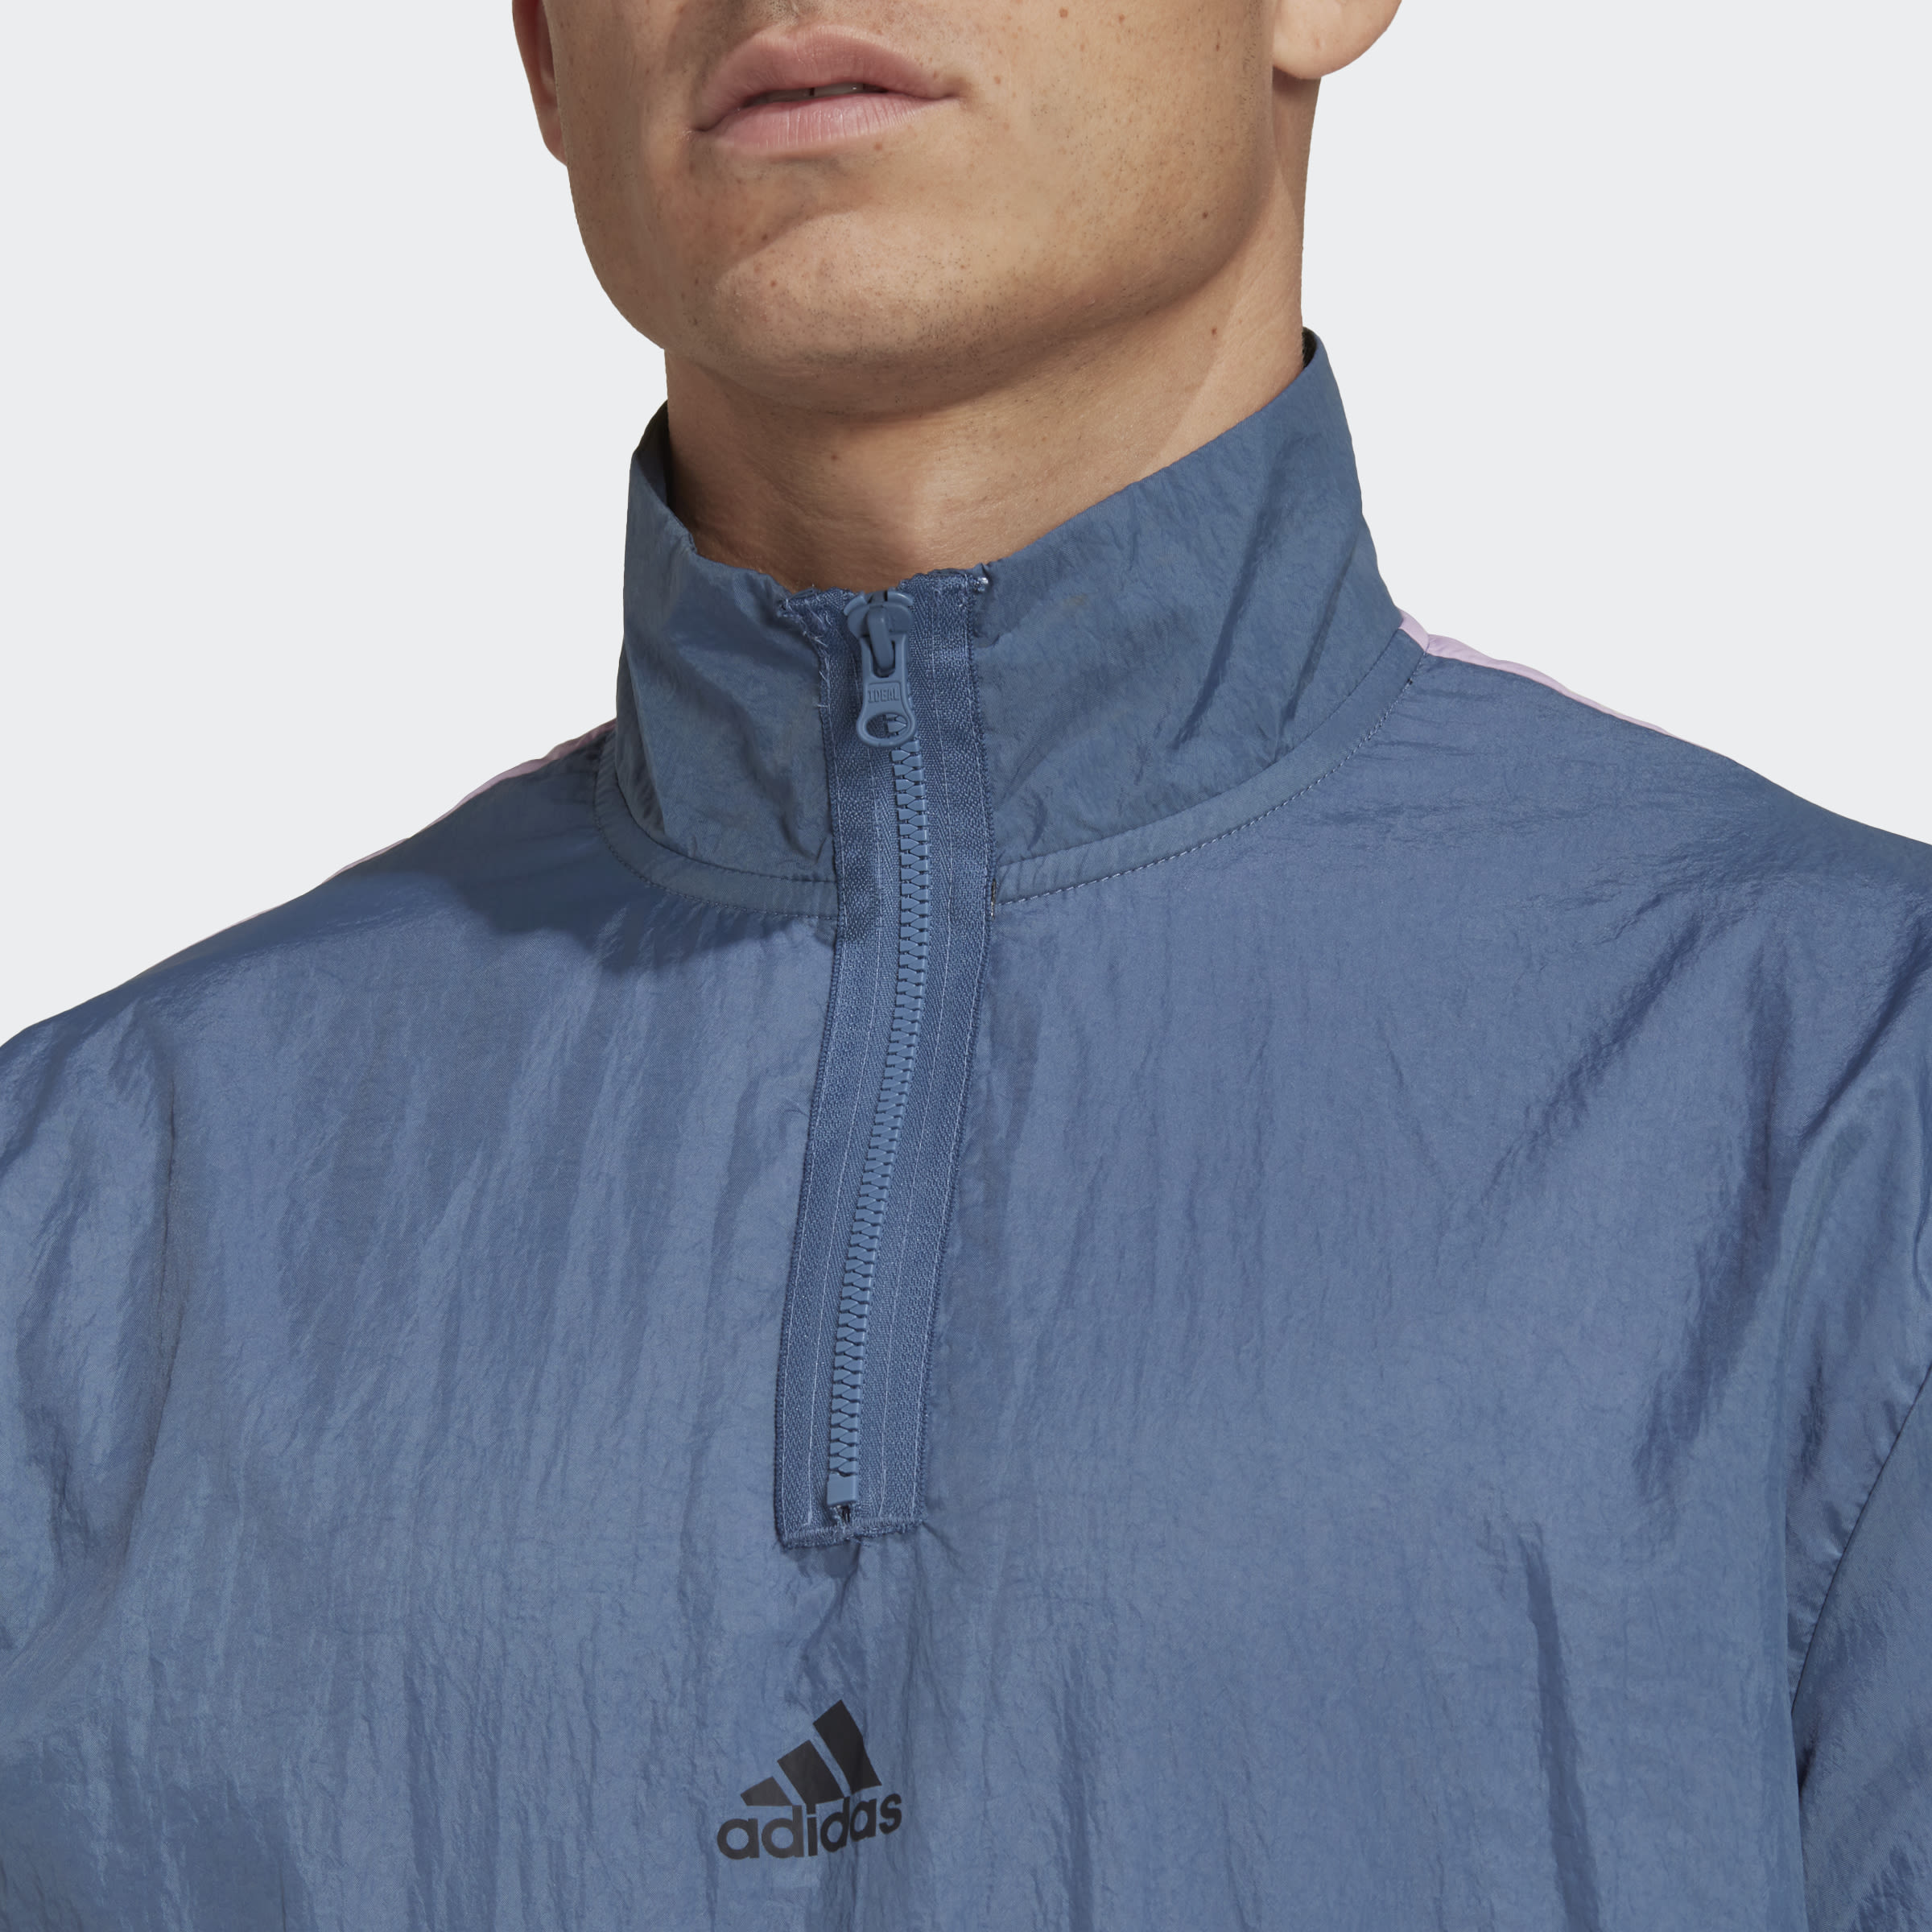 adidas Originals Future Icons Woven 1/4 Zip Tracksuit Bottoms | Pro:Direct Soccer